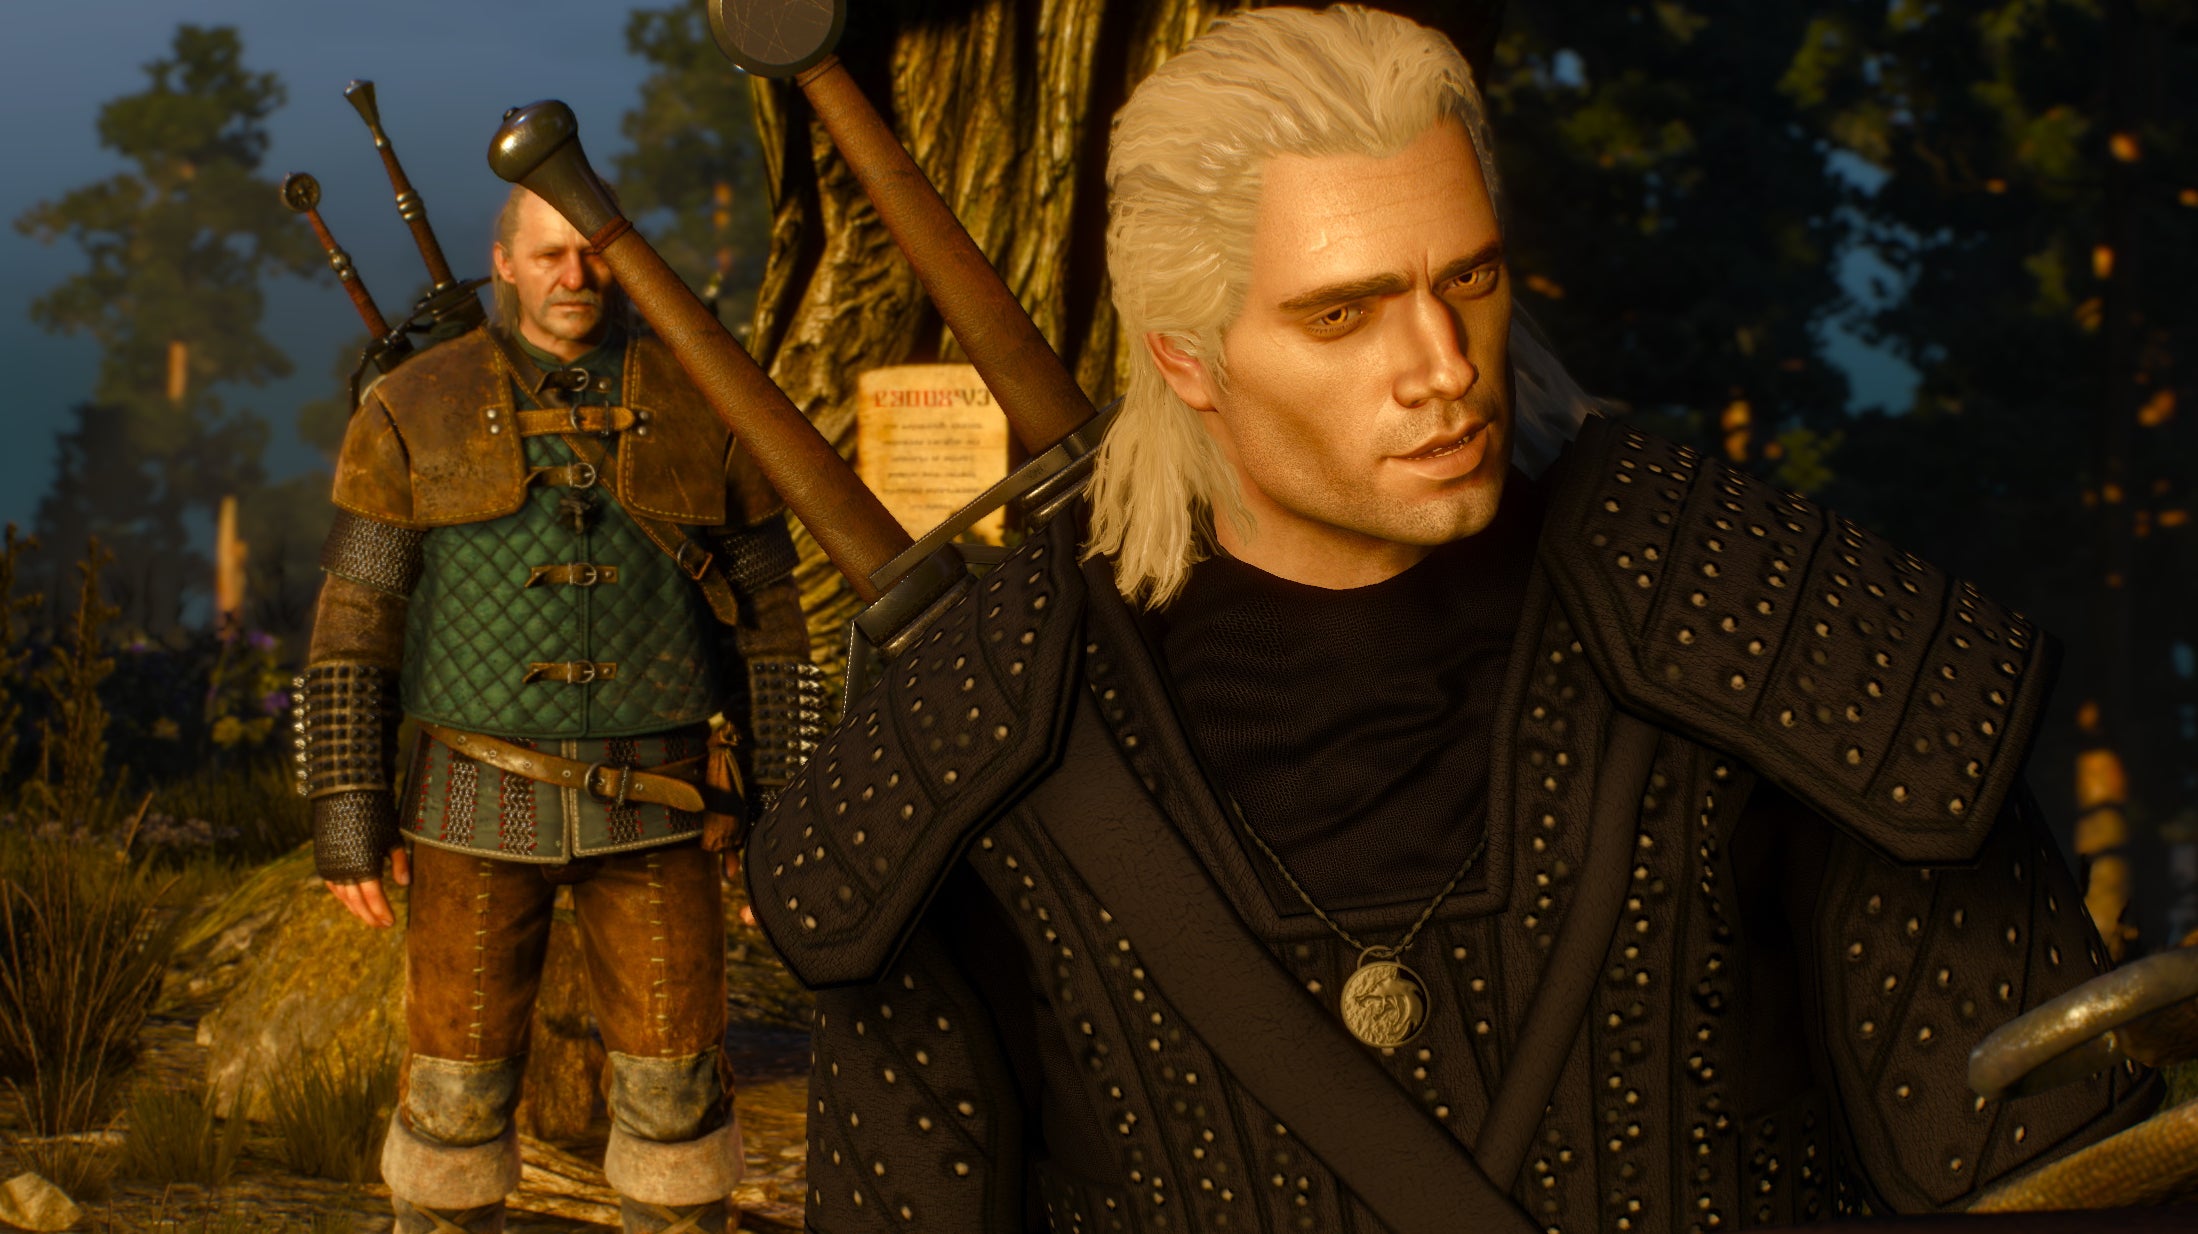 Image for Dress Geralt in his Netflix attire thanks to a new Witcher 3 mod